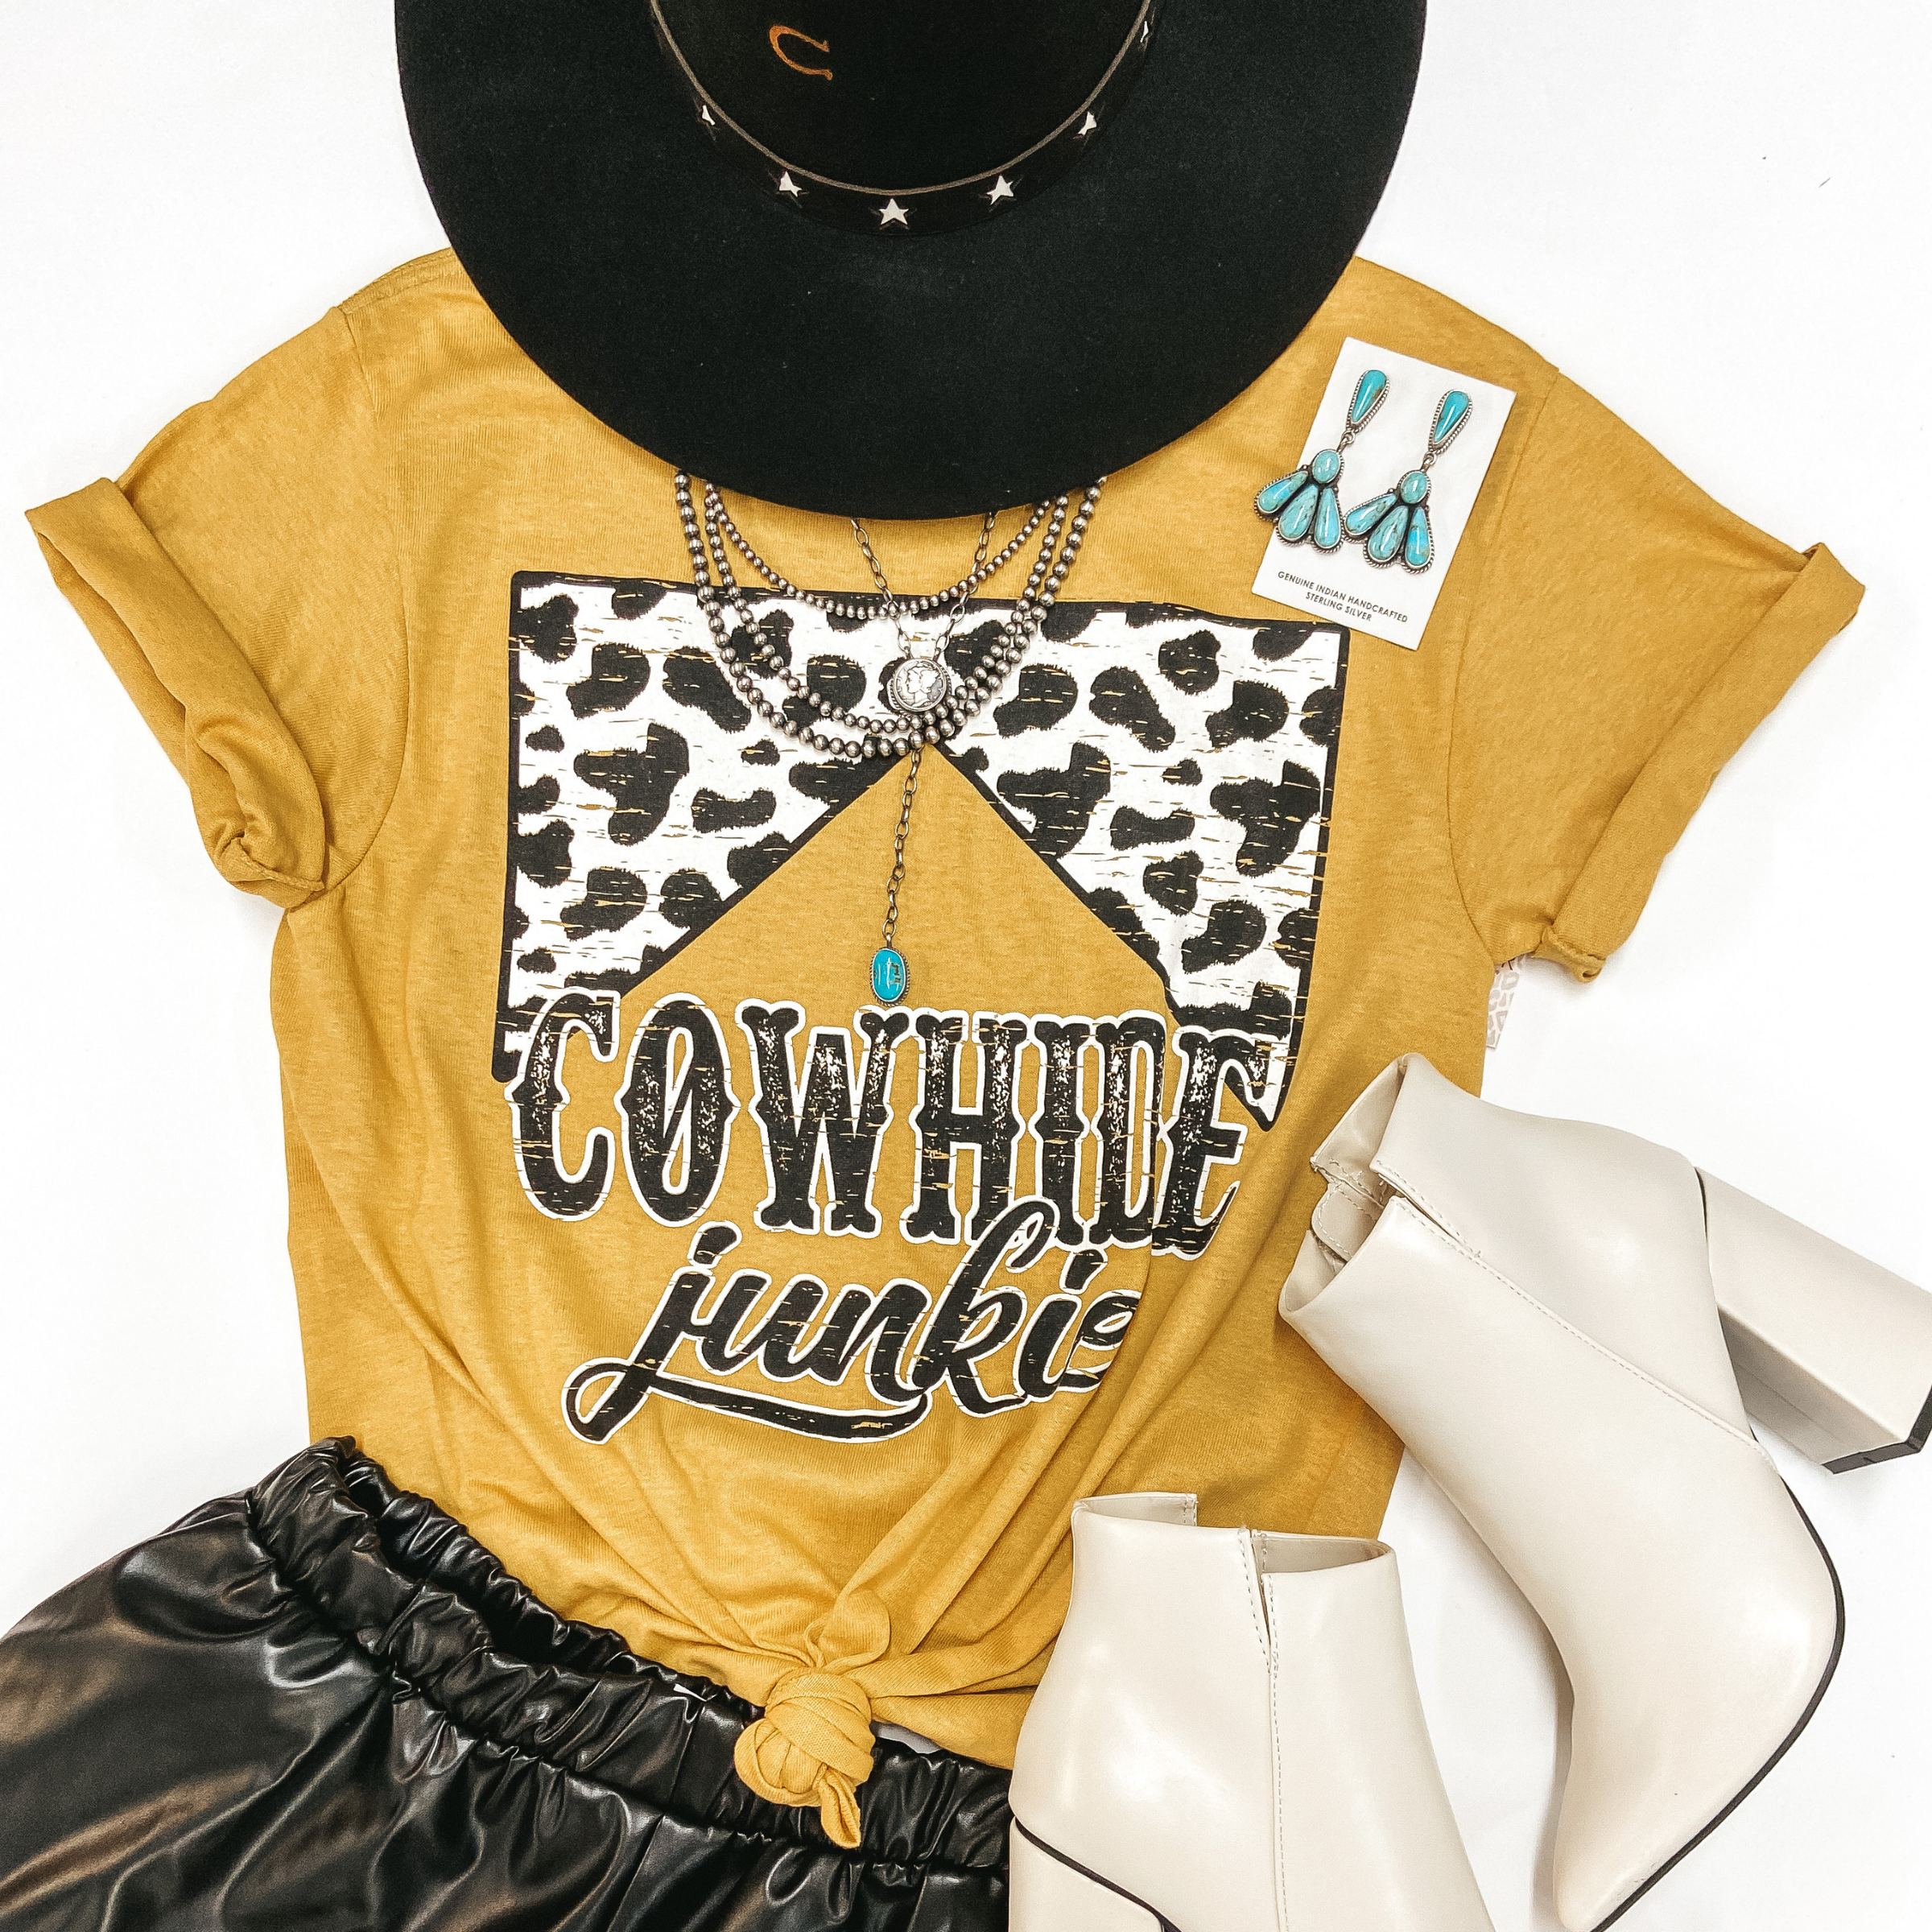 A mustard yellow graphic tee with cuffed sleeves and a knotted front. The graphic has a cowhide print design that says "Cowhide Junkie" underneath. Tee shirt is pictured on white background with ivory booties, black faux leather shorts, a black hat, and sterling silver jewelry.